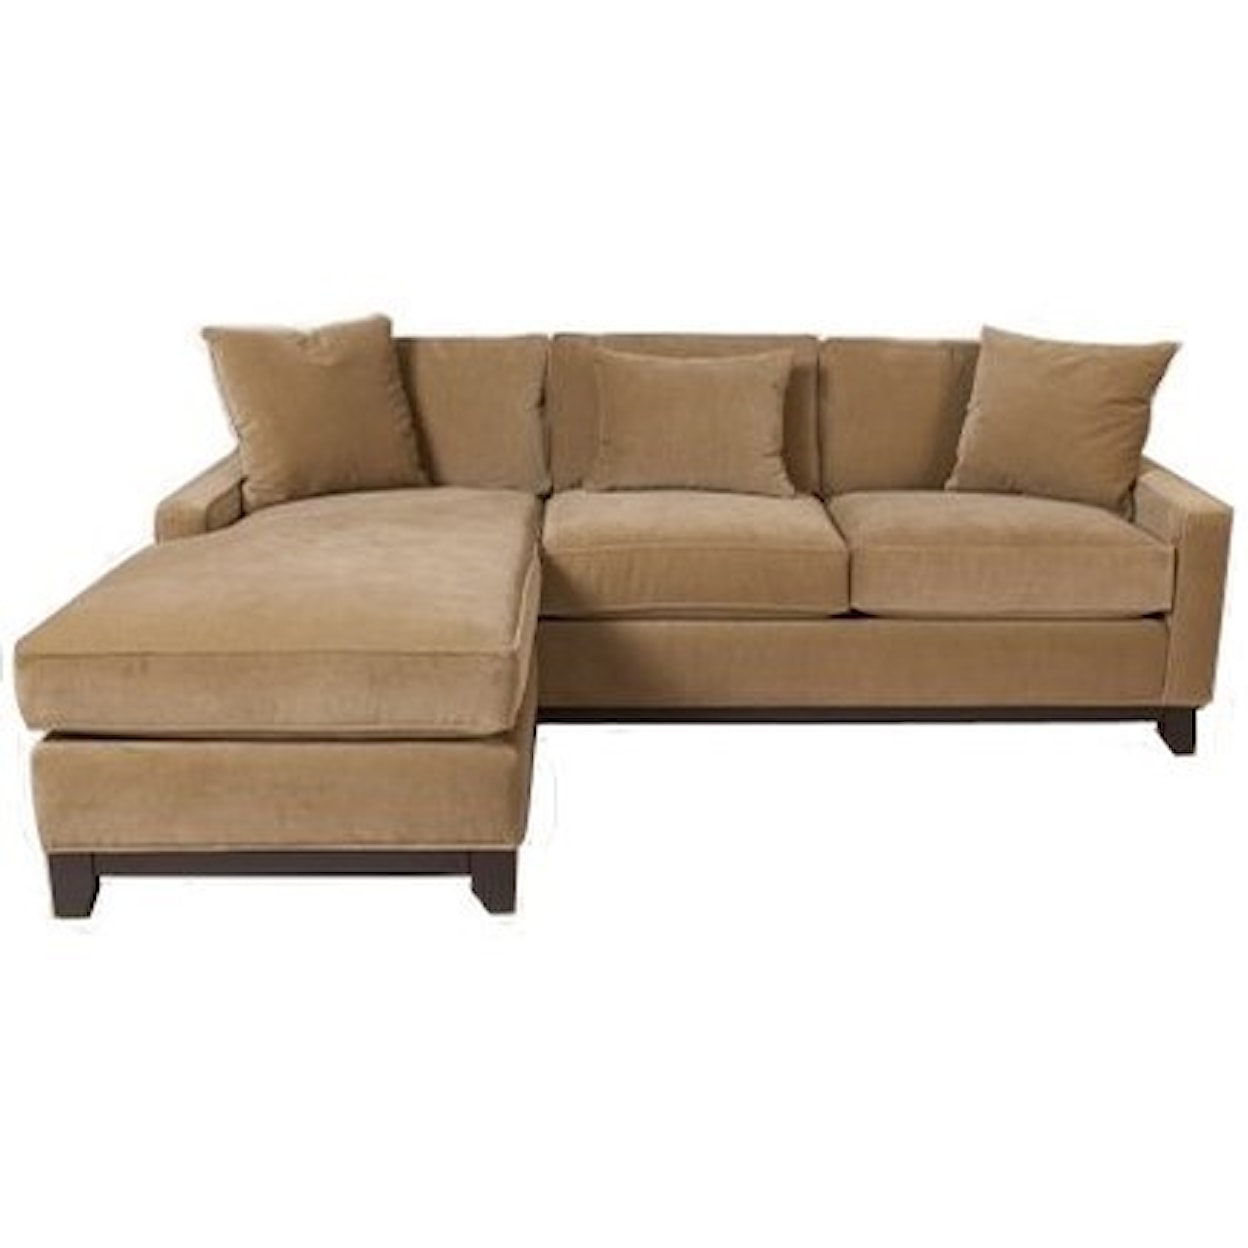 Jonathan Louis Janet Contemporary Sofa with Chaise